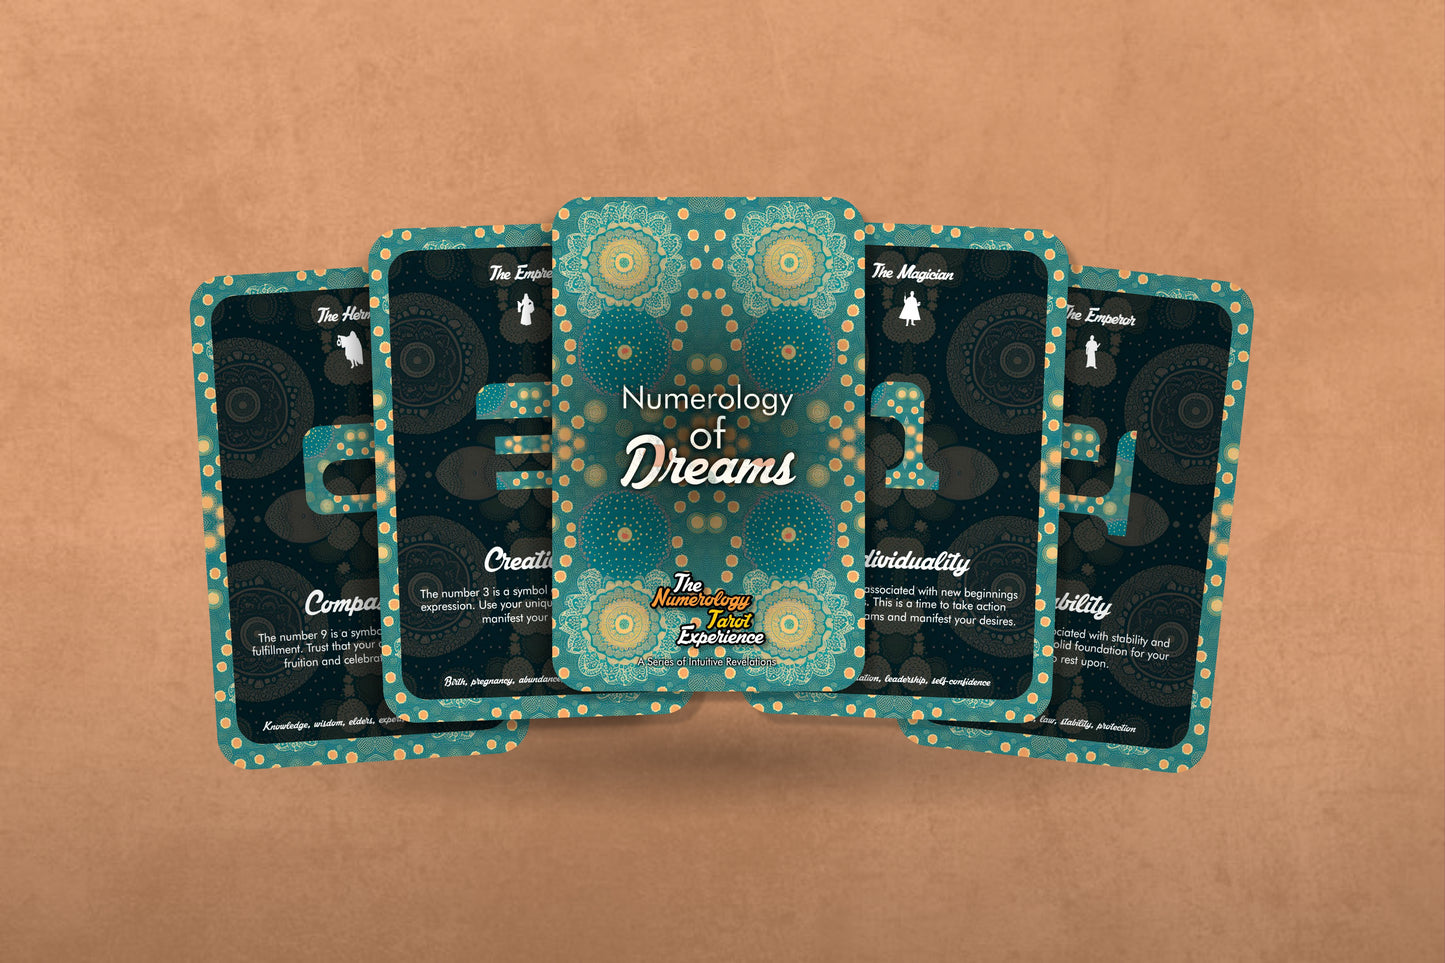 Numerology of Dreams - The Numerology Tarot Experience